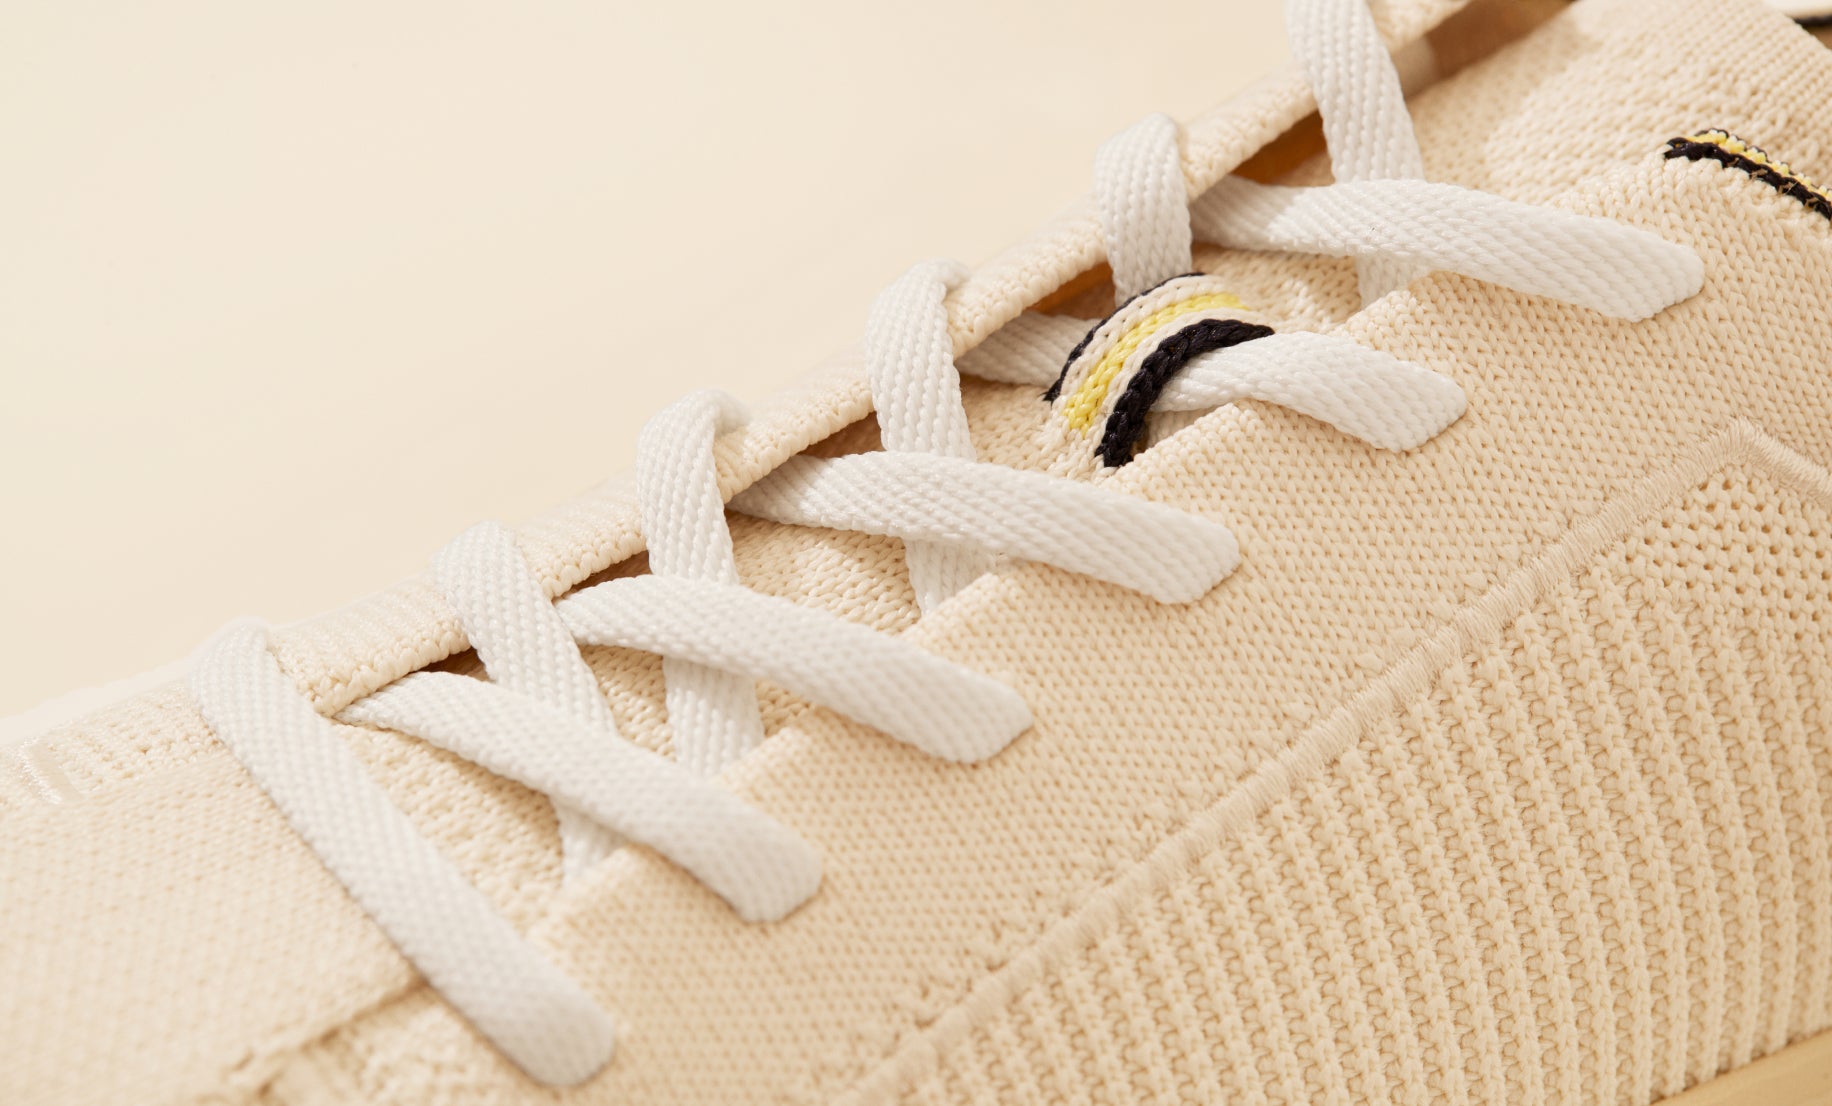 Close up of the laces of The Lace Up in Vanilla, showing the striped navy, yellow and white lace stay detail.  